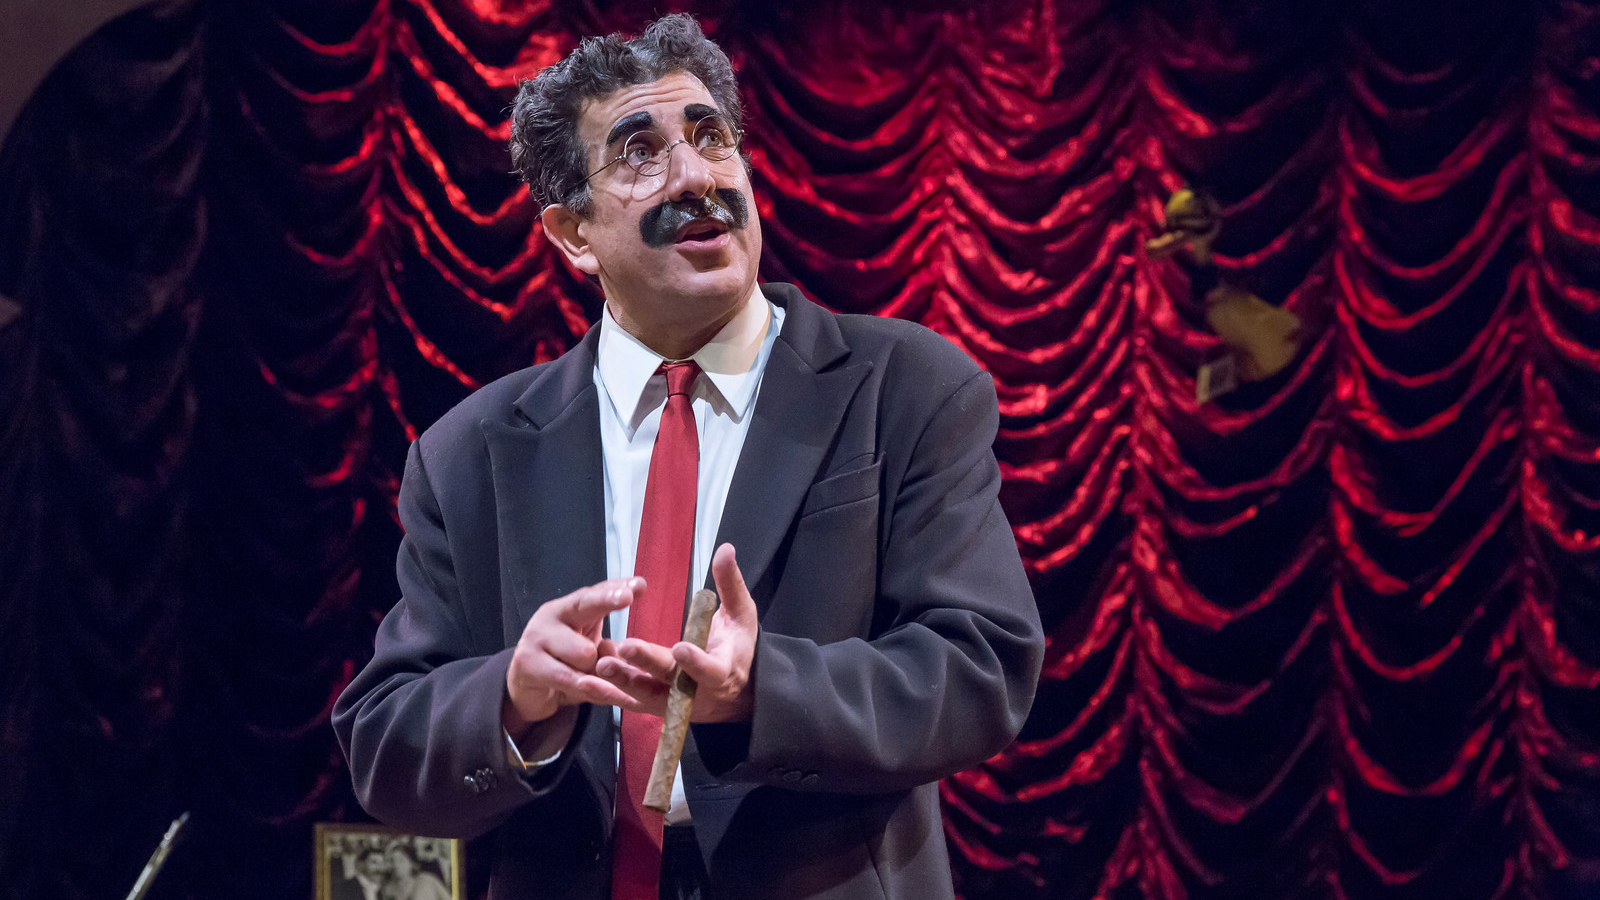 Frank Ferrante stars in his internationally acclaimed stage performance as legendary comedian Groucho Marx. Photo by Mikki Schaffner Photography.